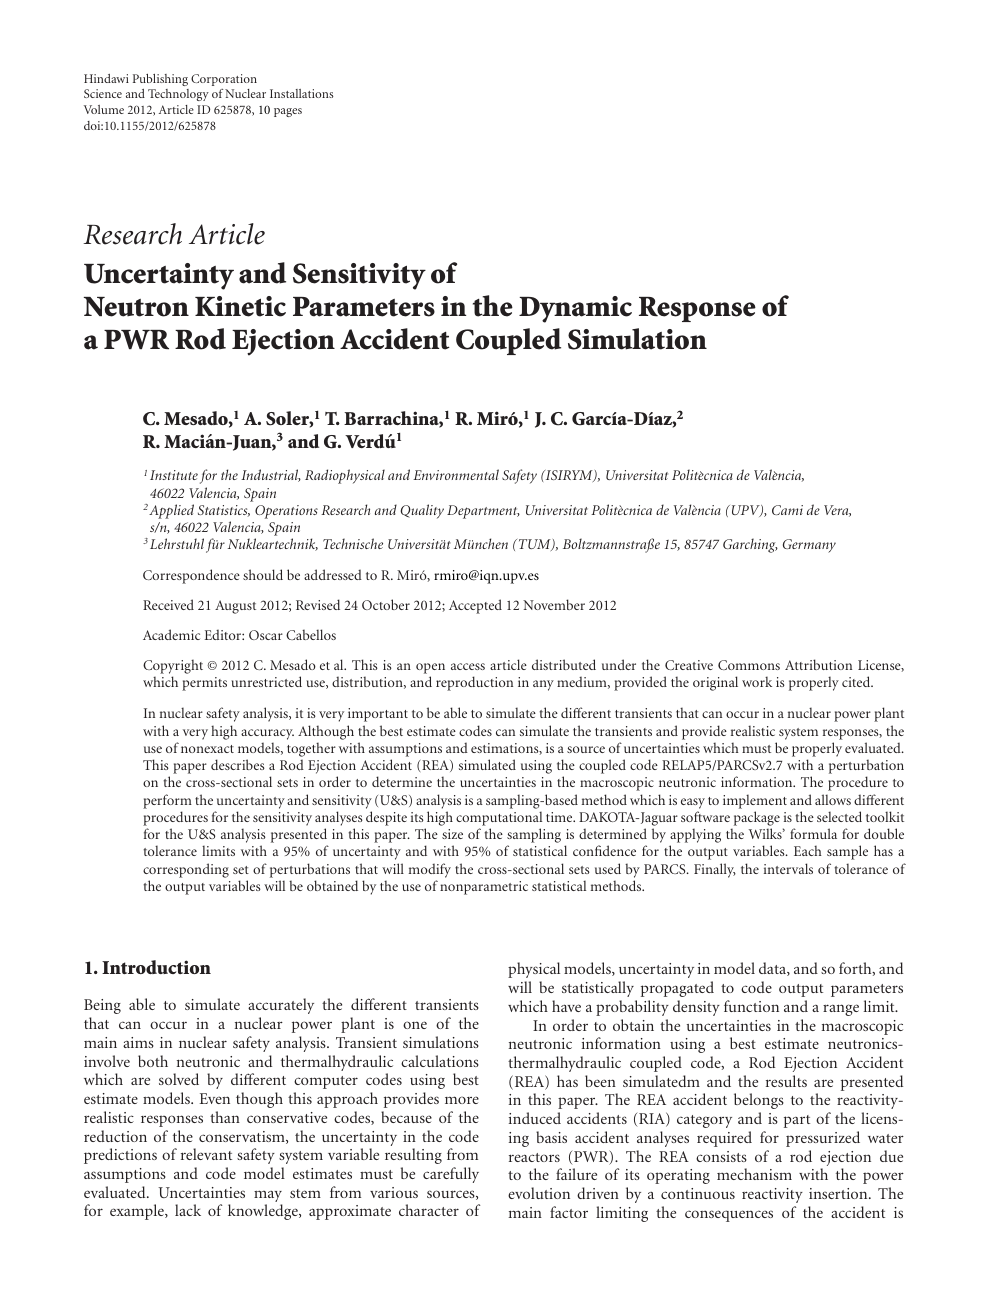 Uncertainty And Sensitivity Of Neutron Kinetic Parameters In The Dynamic Response Of A Pwr Rod Ejection Accident Coupled Simulation Topic Of Research Paper In Earth And Related Environmental Sciences Download Scholarly